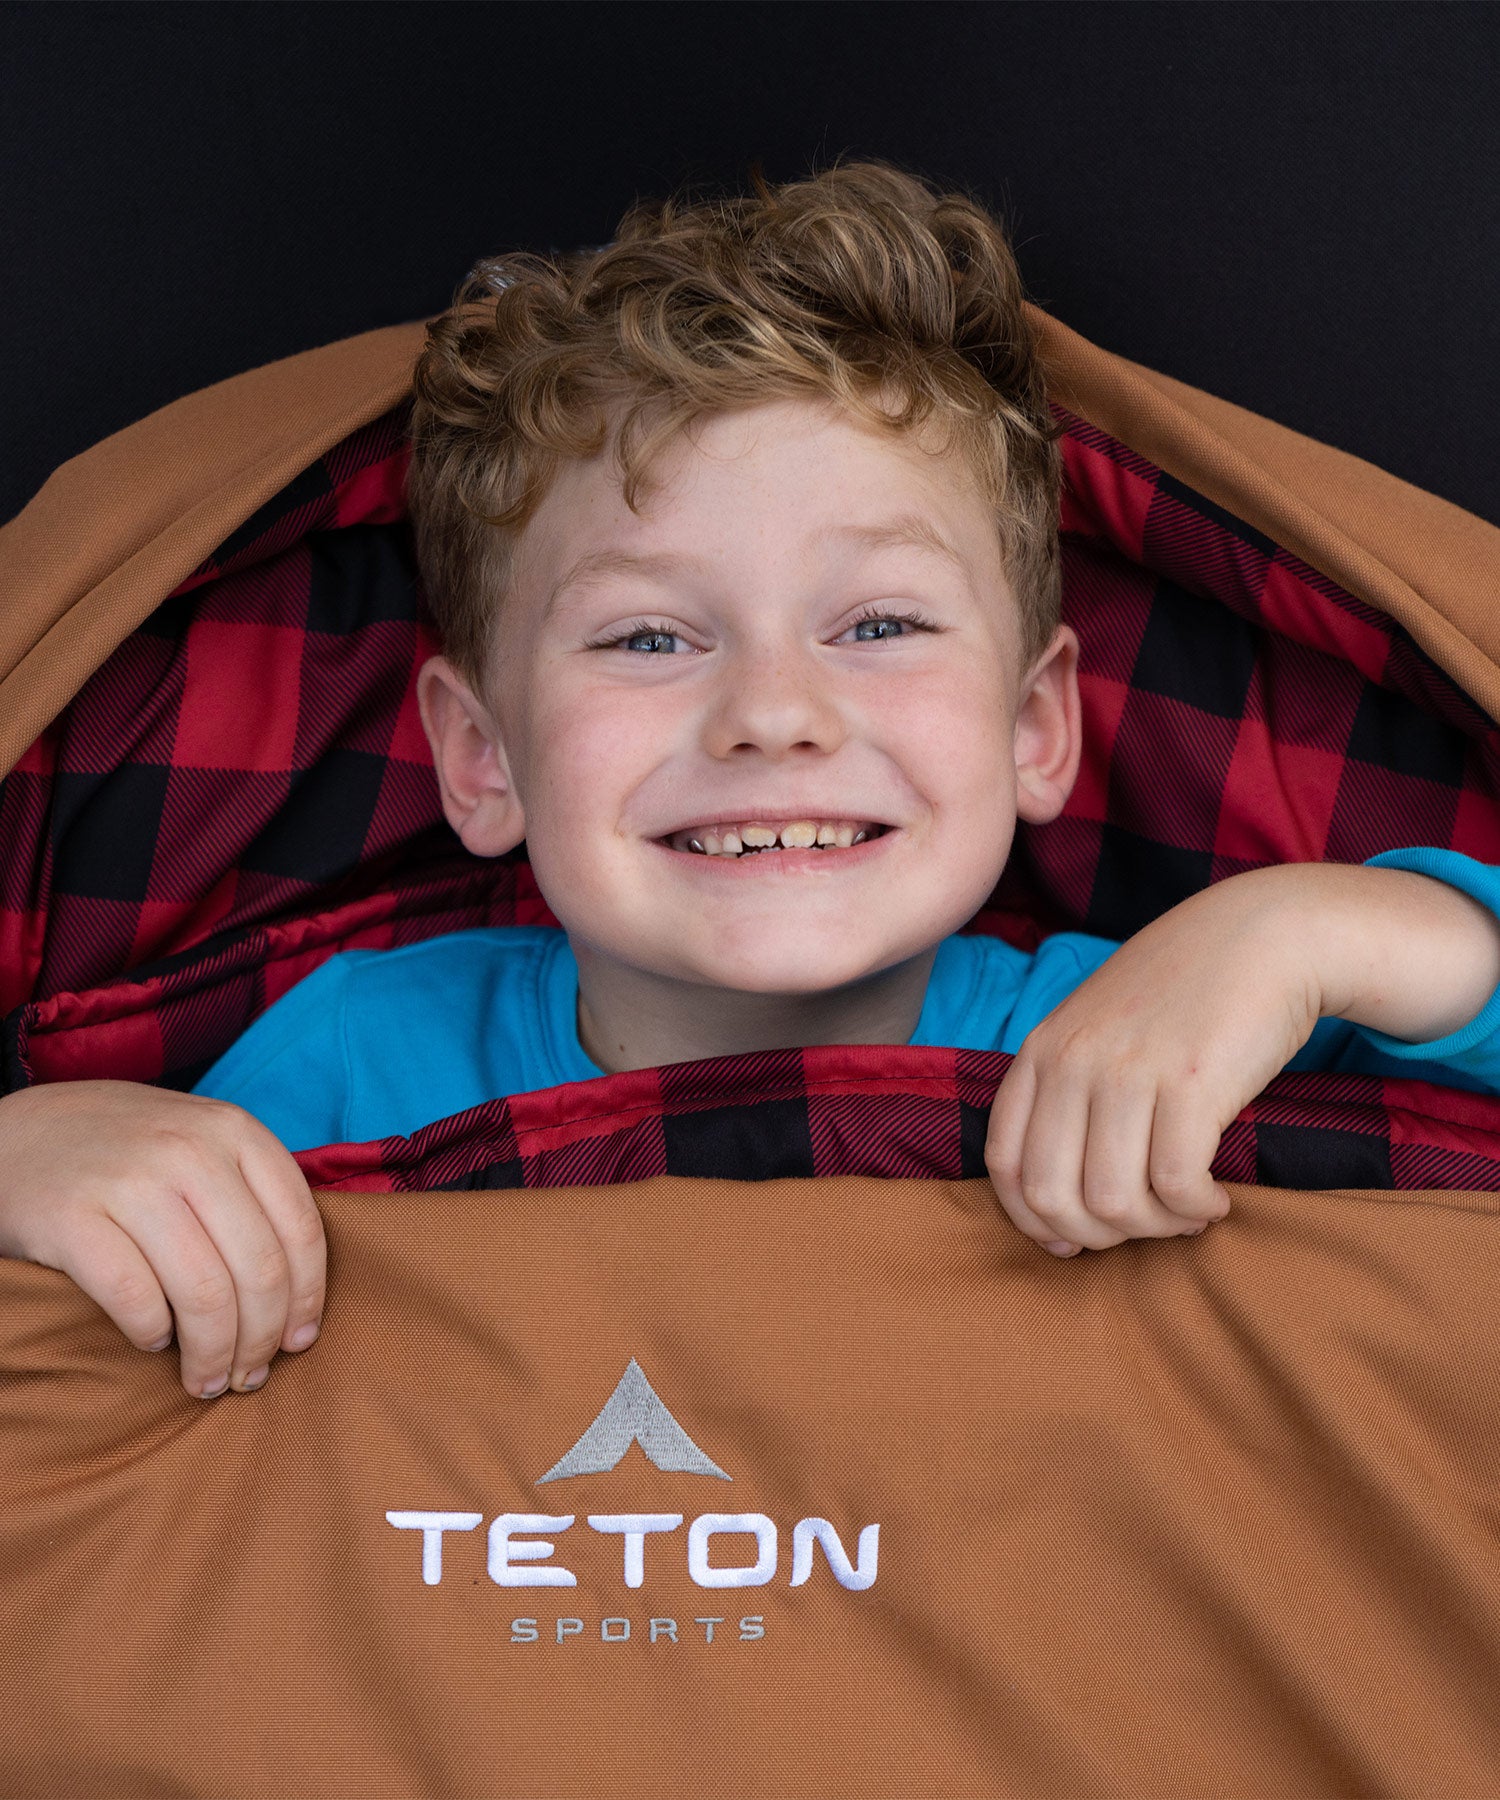 Image shows a young boy smiling while snuggled in a brown TETON Sports Bridger Canvas Sleeping Bag.